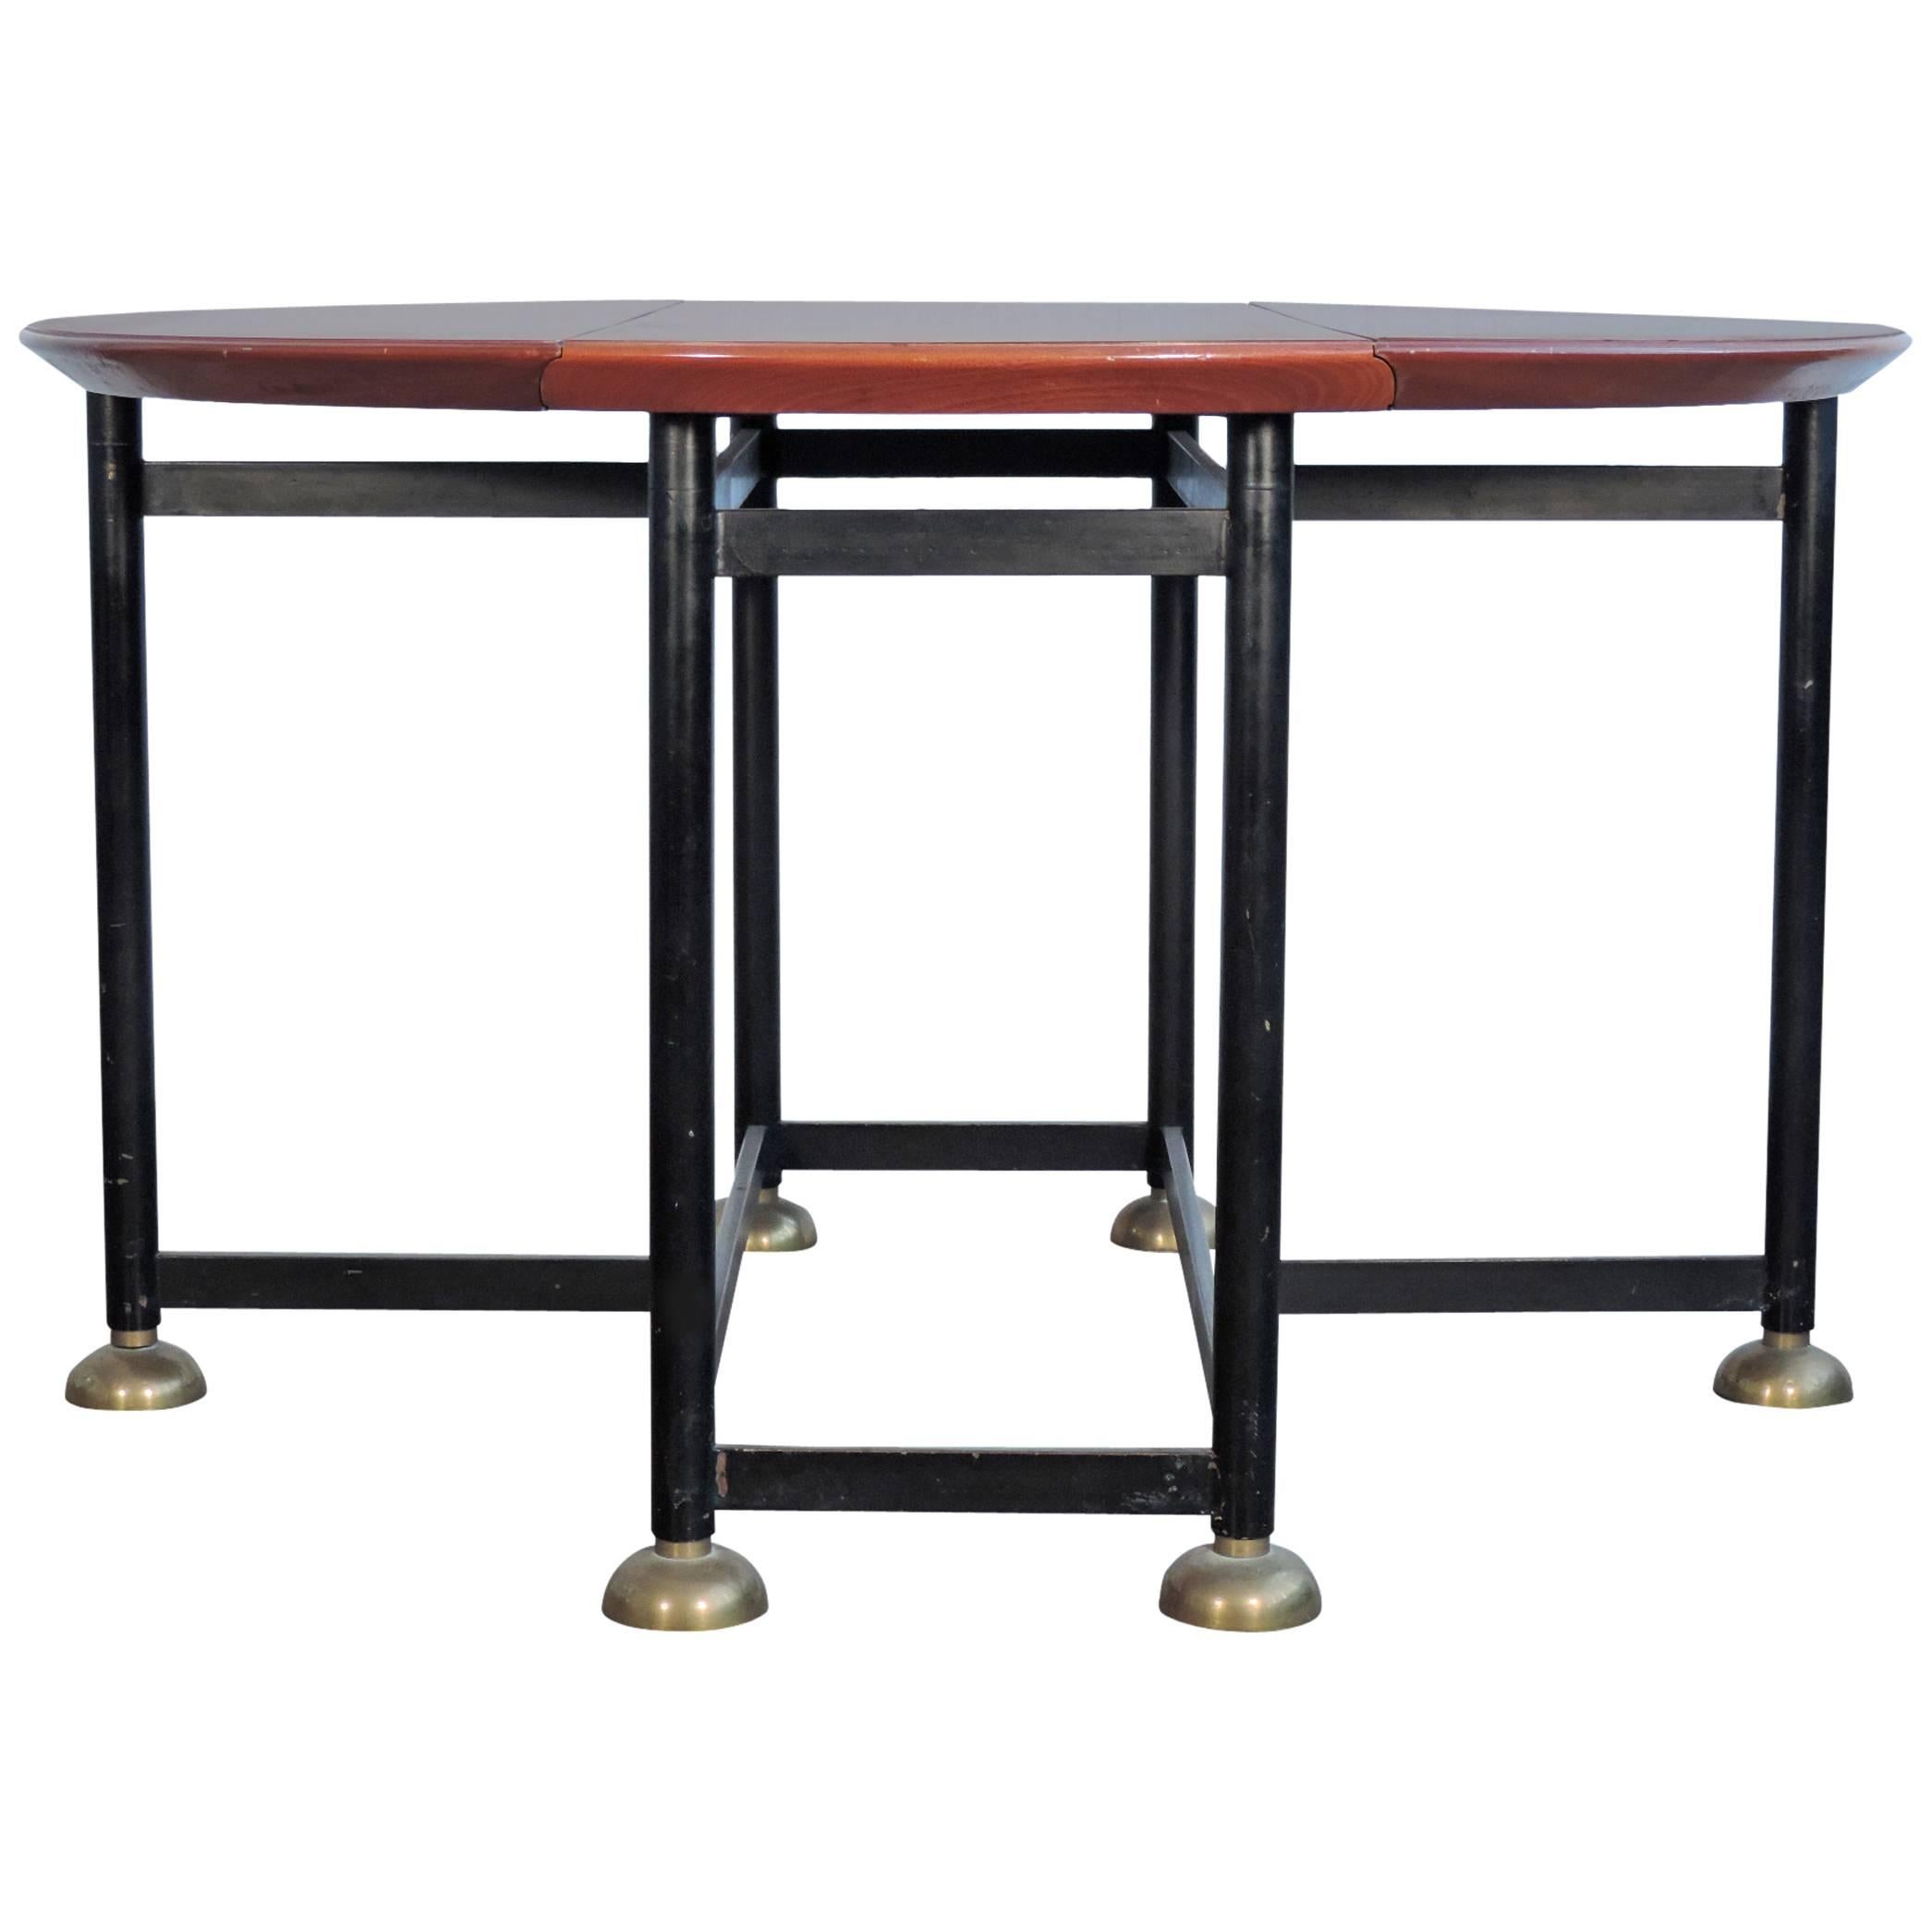 Architectural Italian 20th Century Folding Dining Table